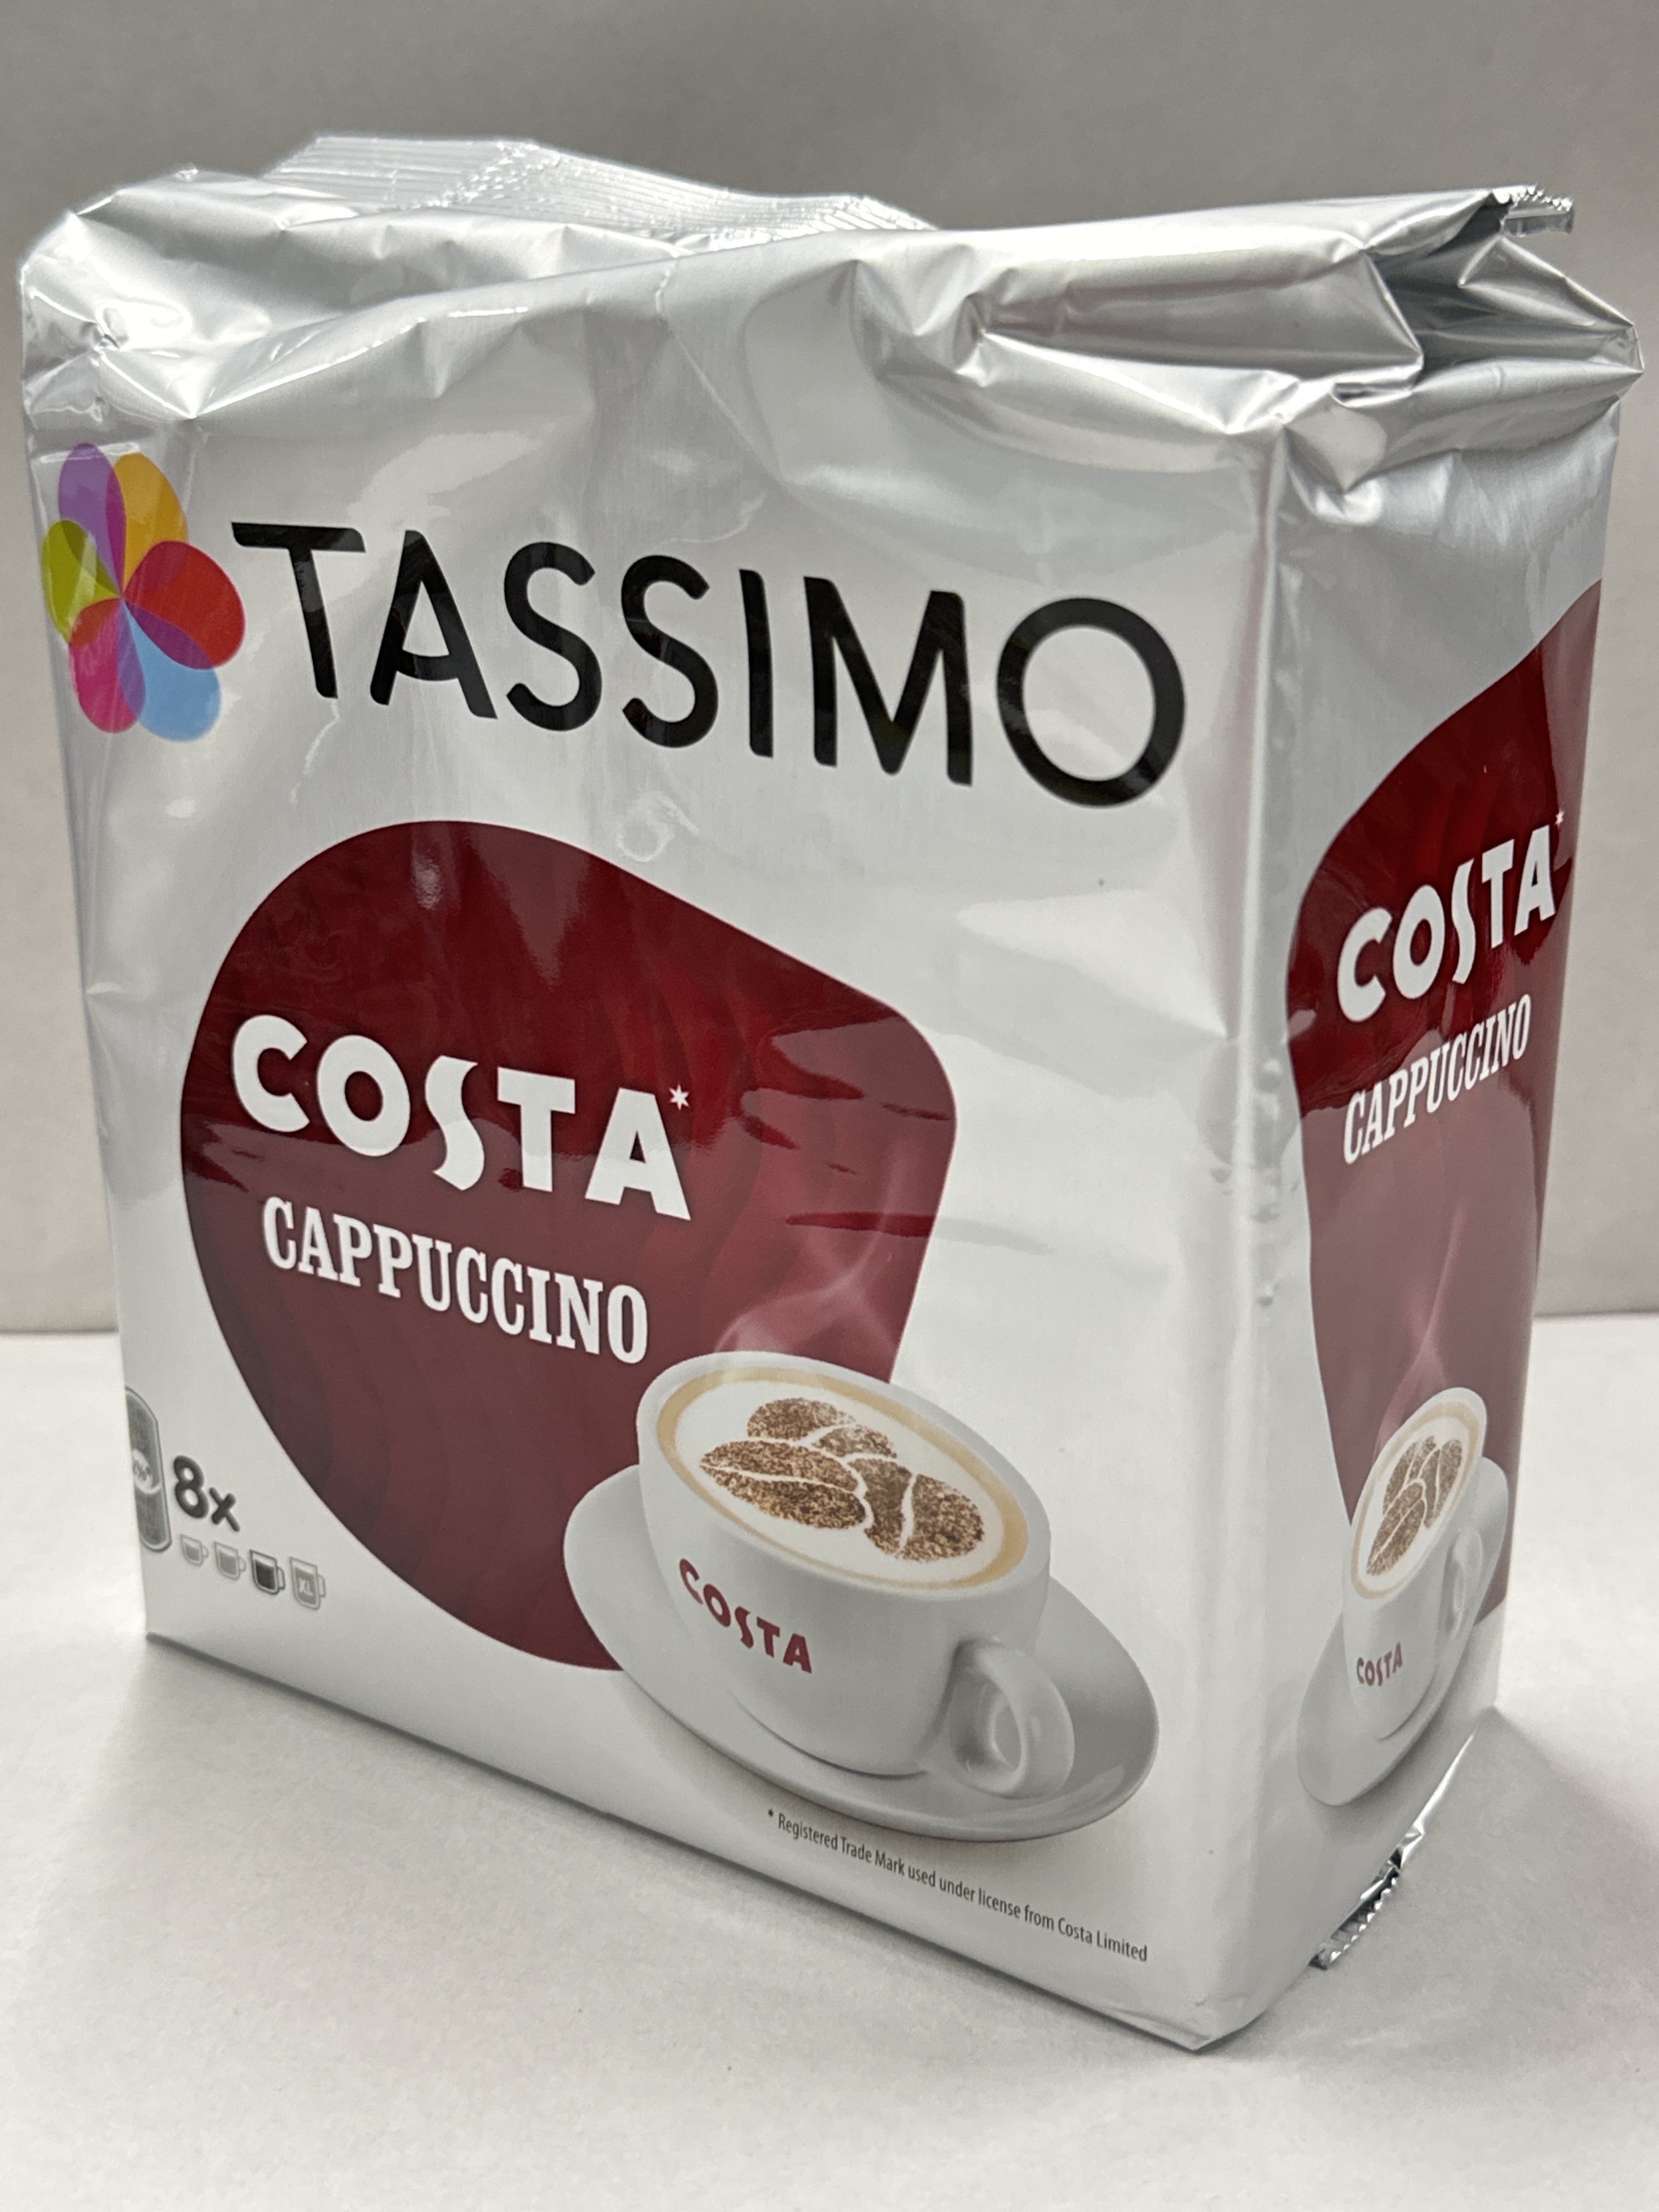 Coffee capsules Tassimo Cappuccino L'Or - pack of 8 on